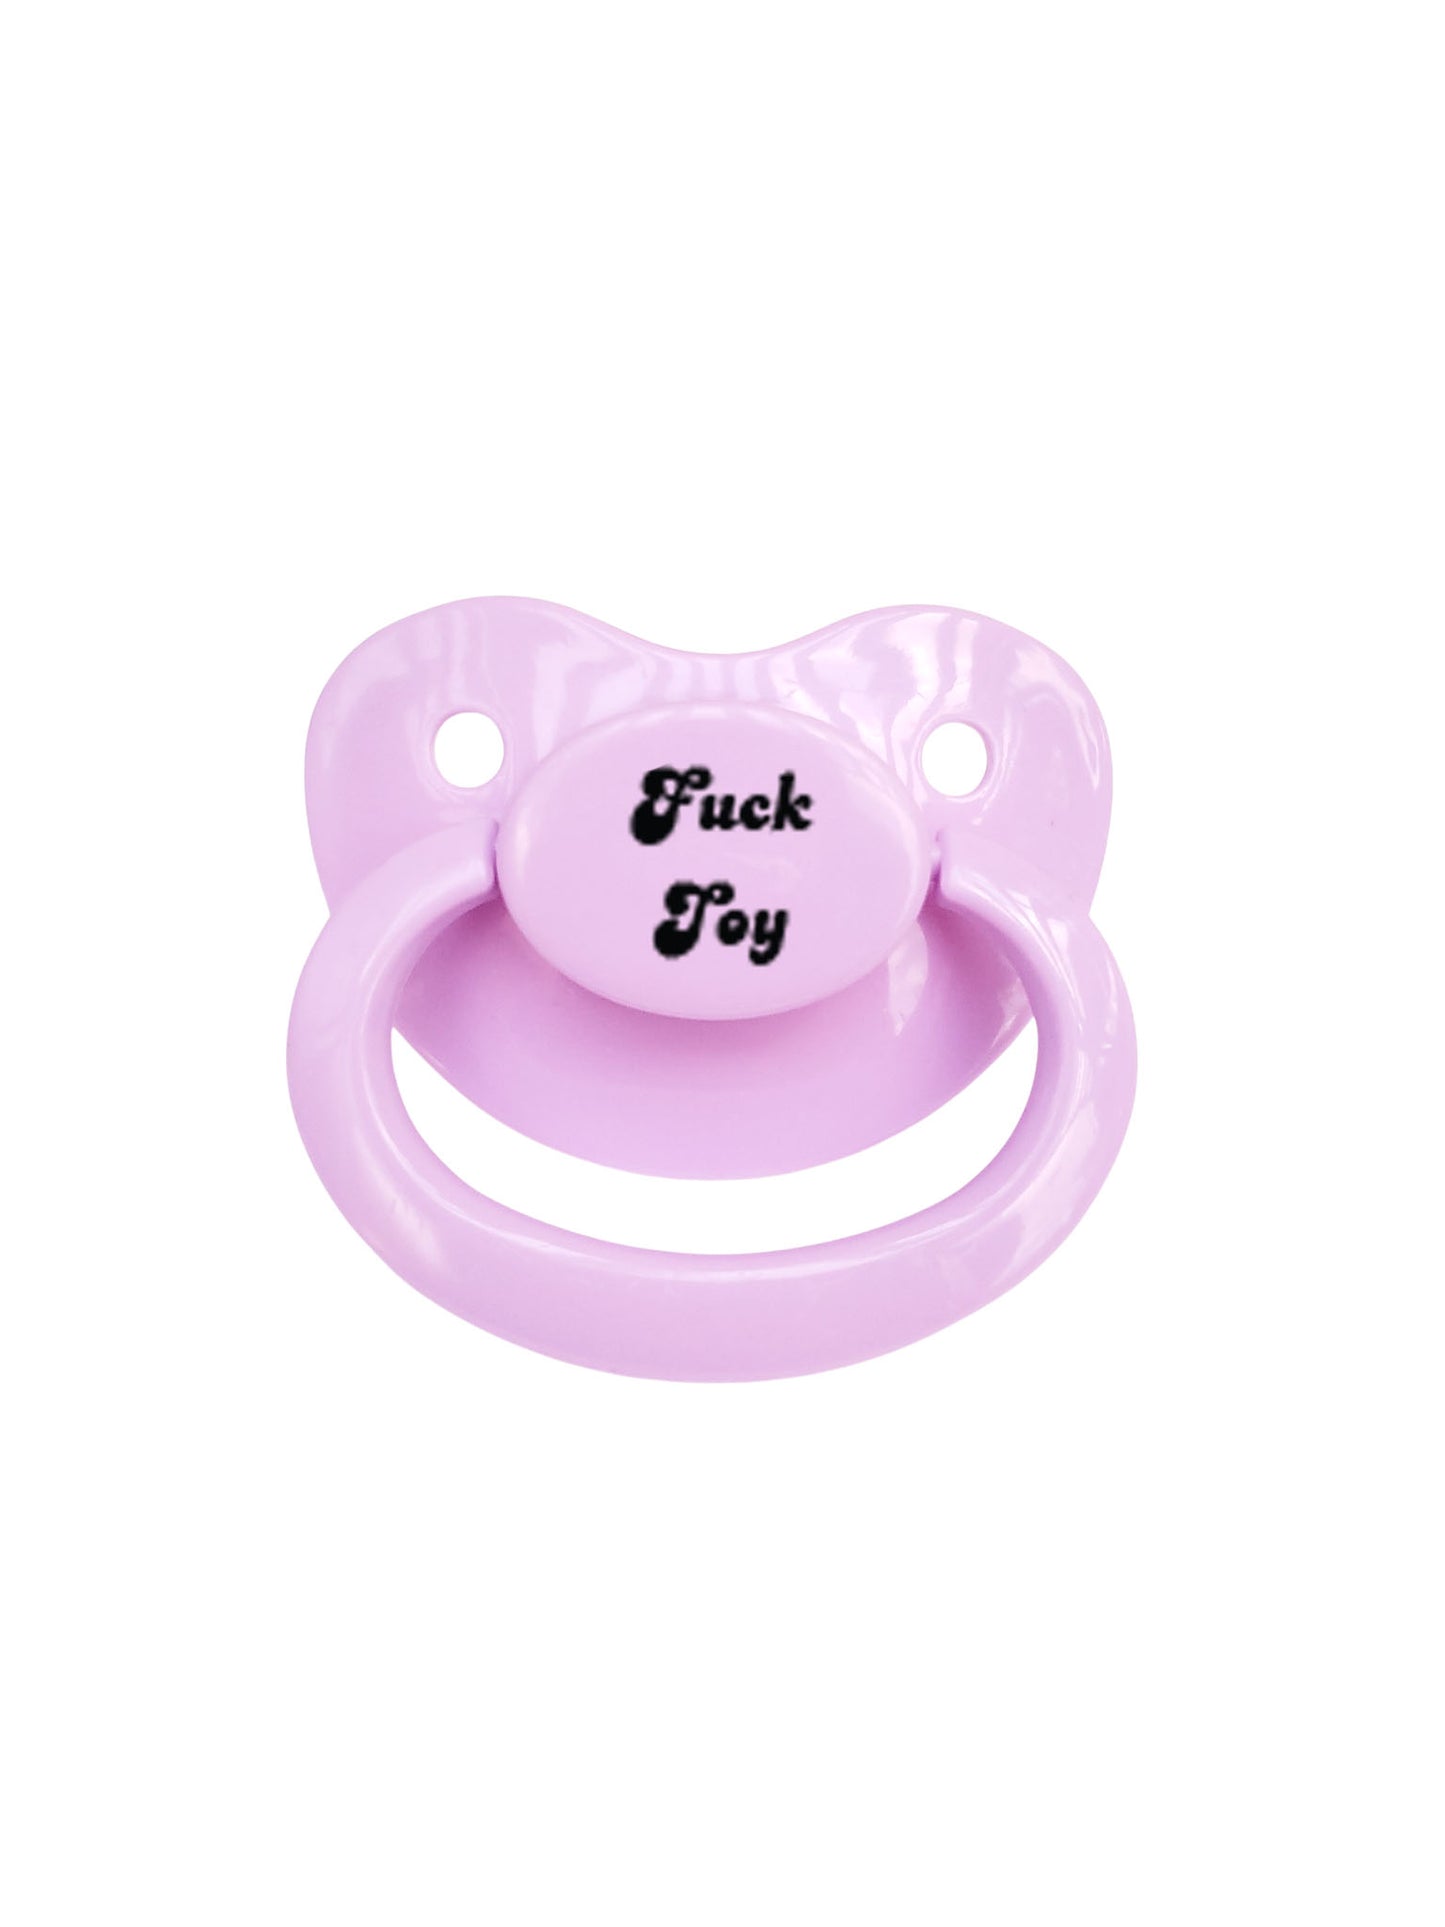 Fuck Toy Adult Pacifier